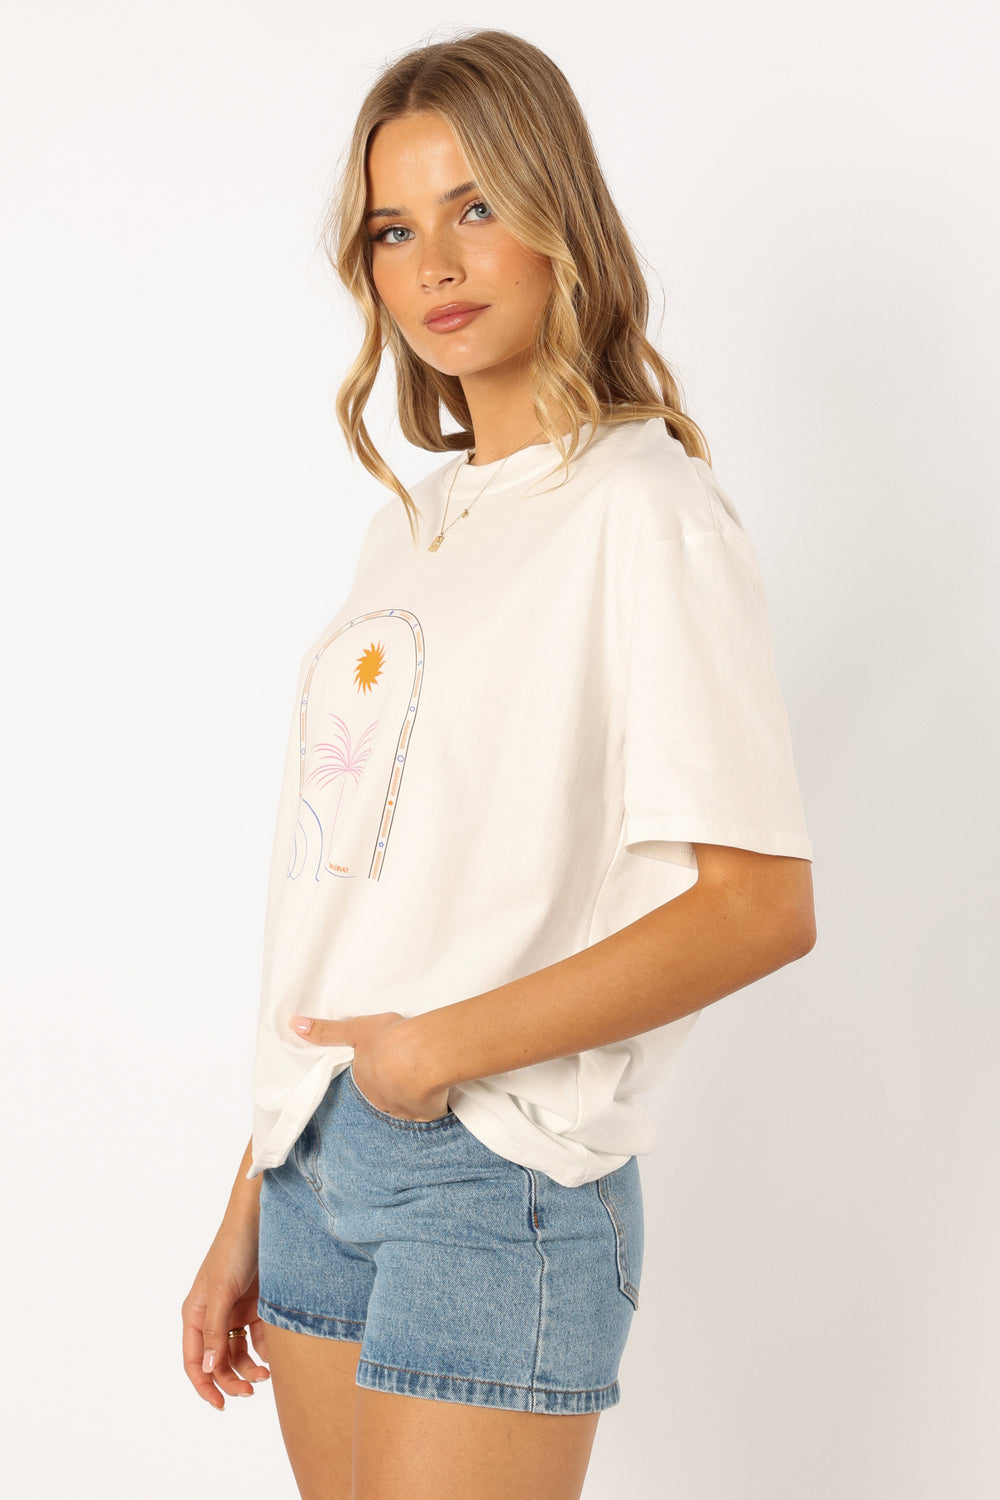 TOPS @Ride The Wave Tee - White